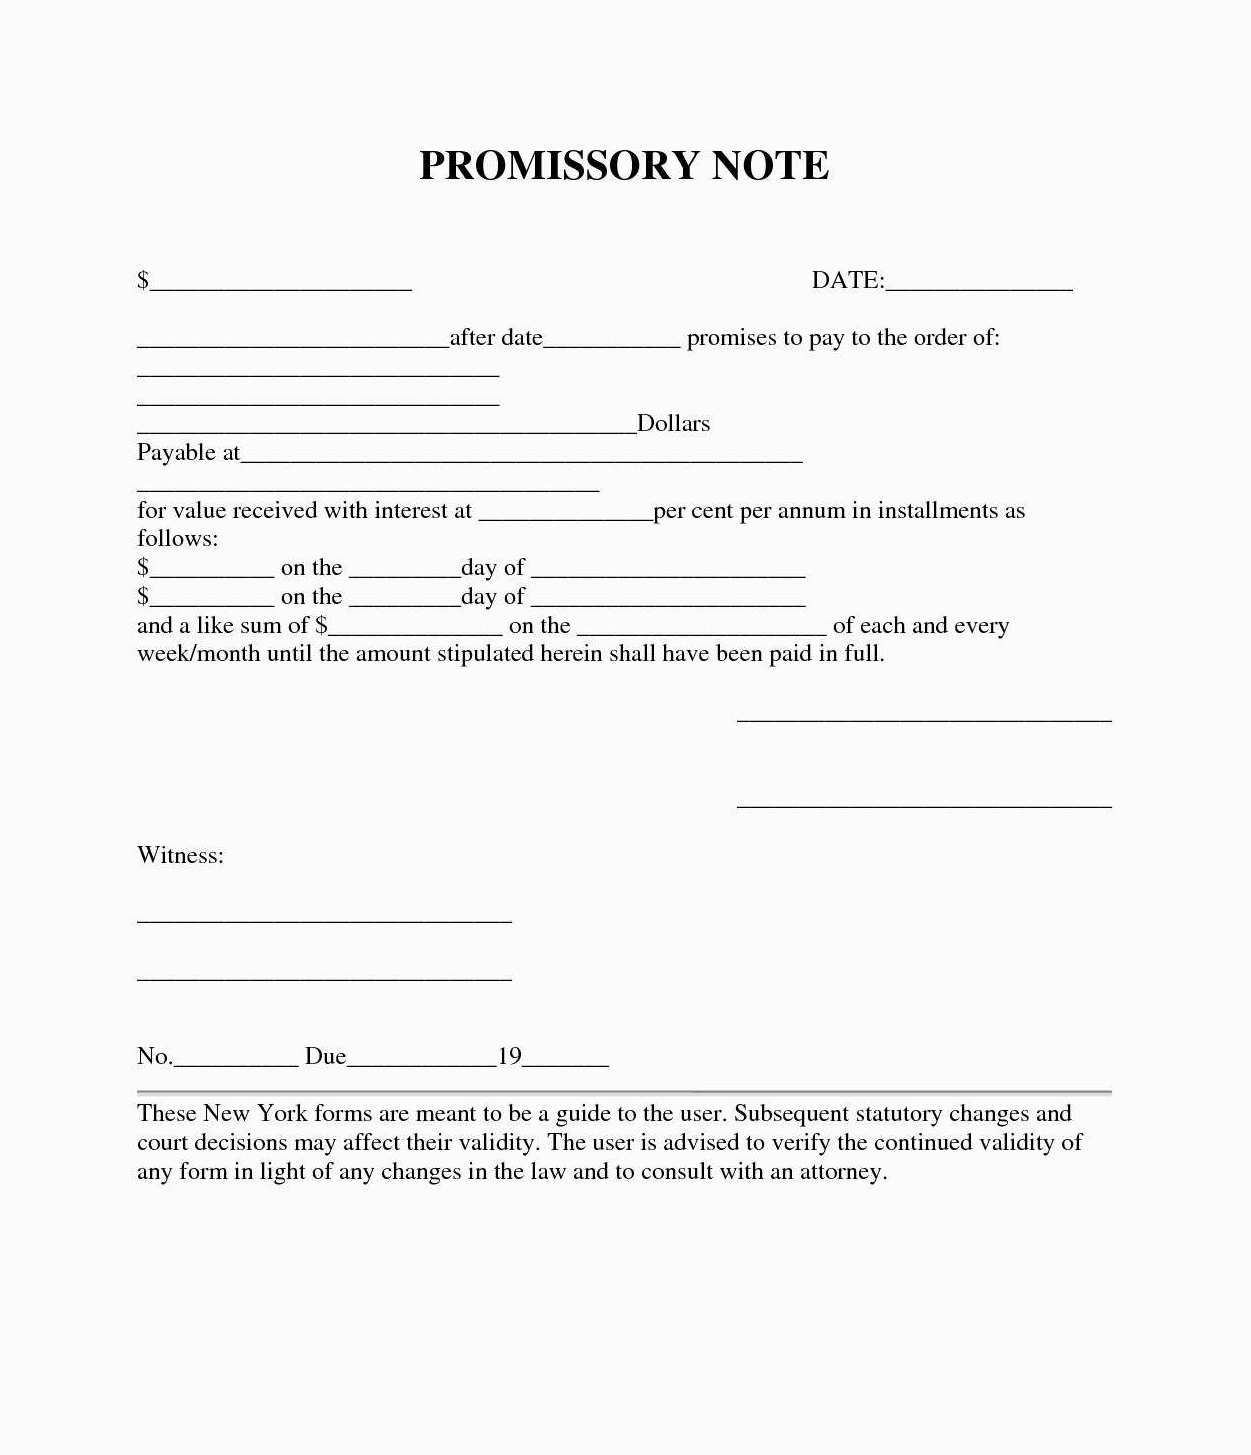 Printable Promissory Note Template - Customize and Print